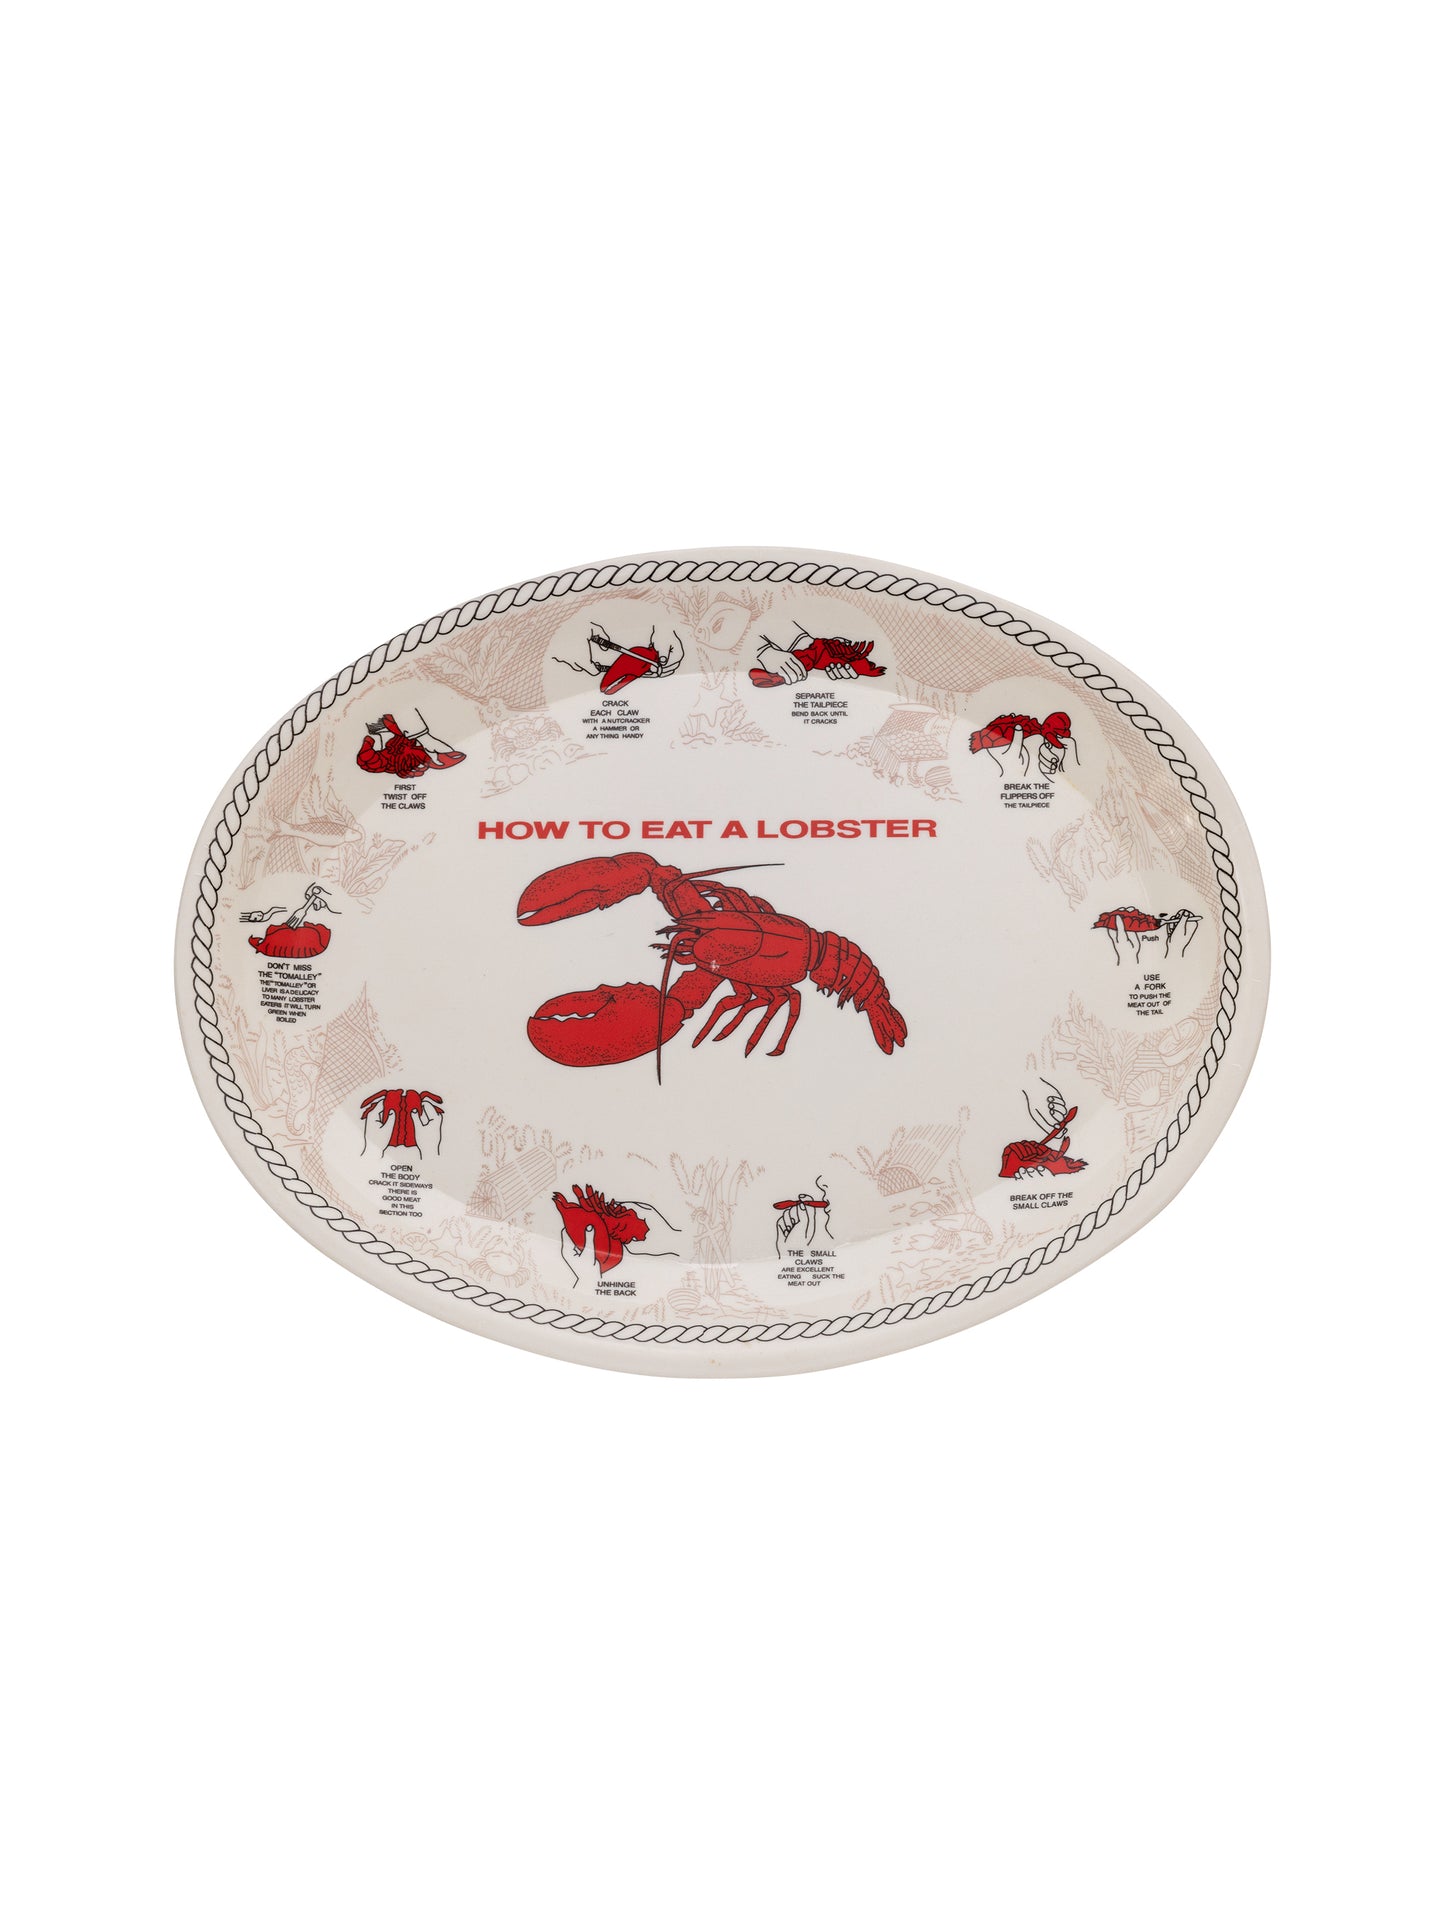 Vintage How to Eat a Lobster Coastal Plate Weston Table